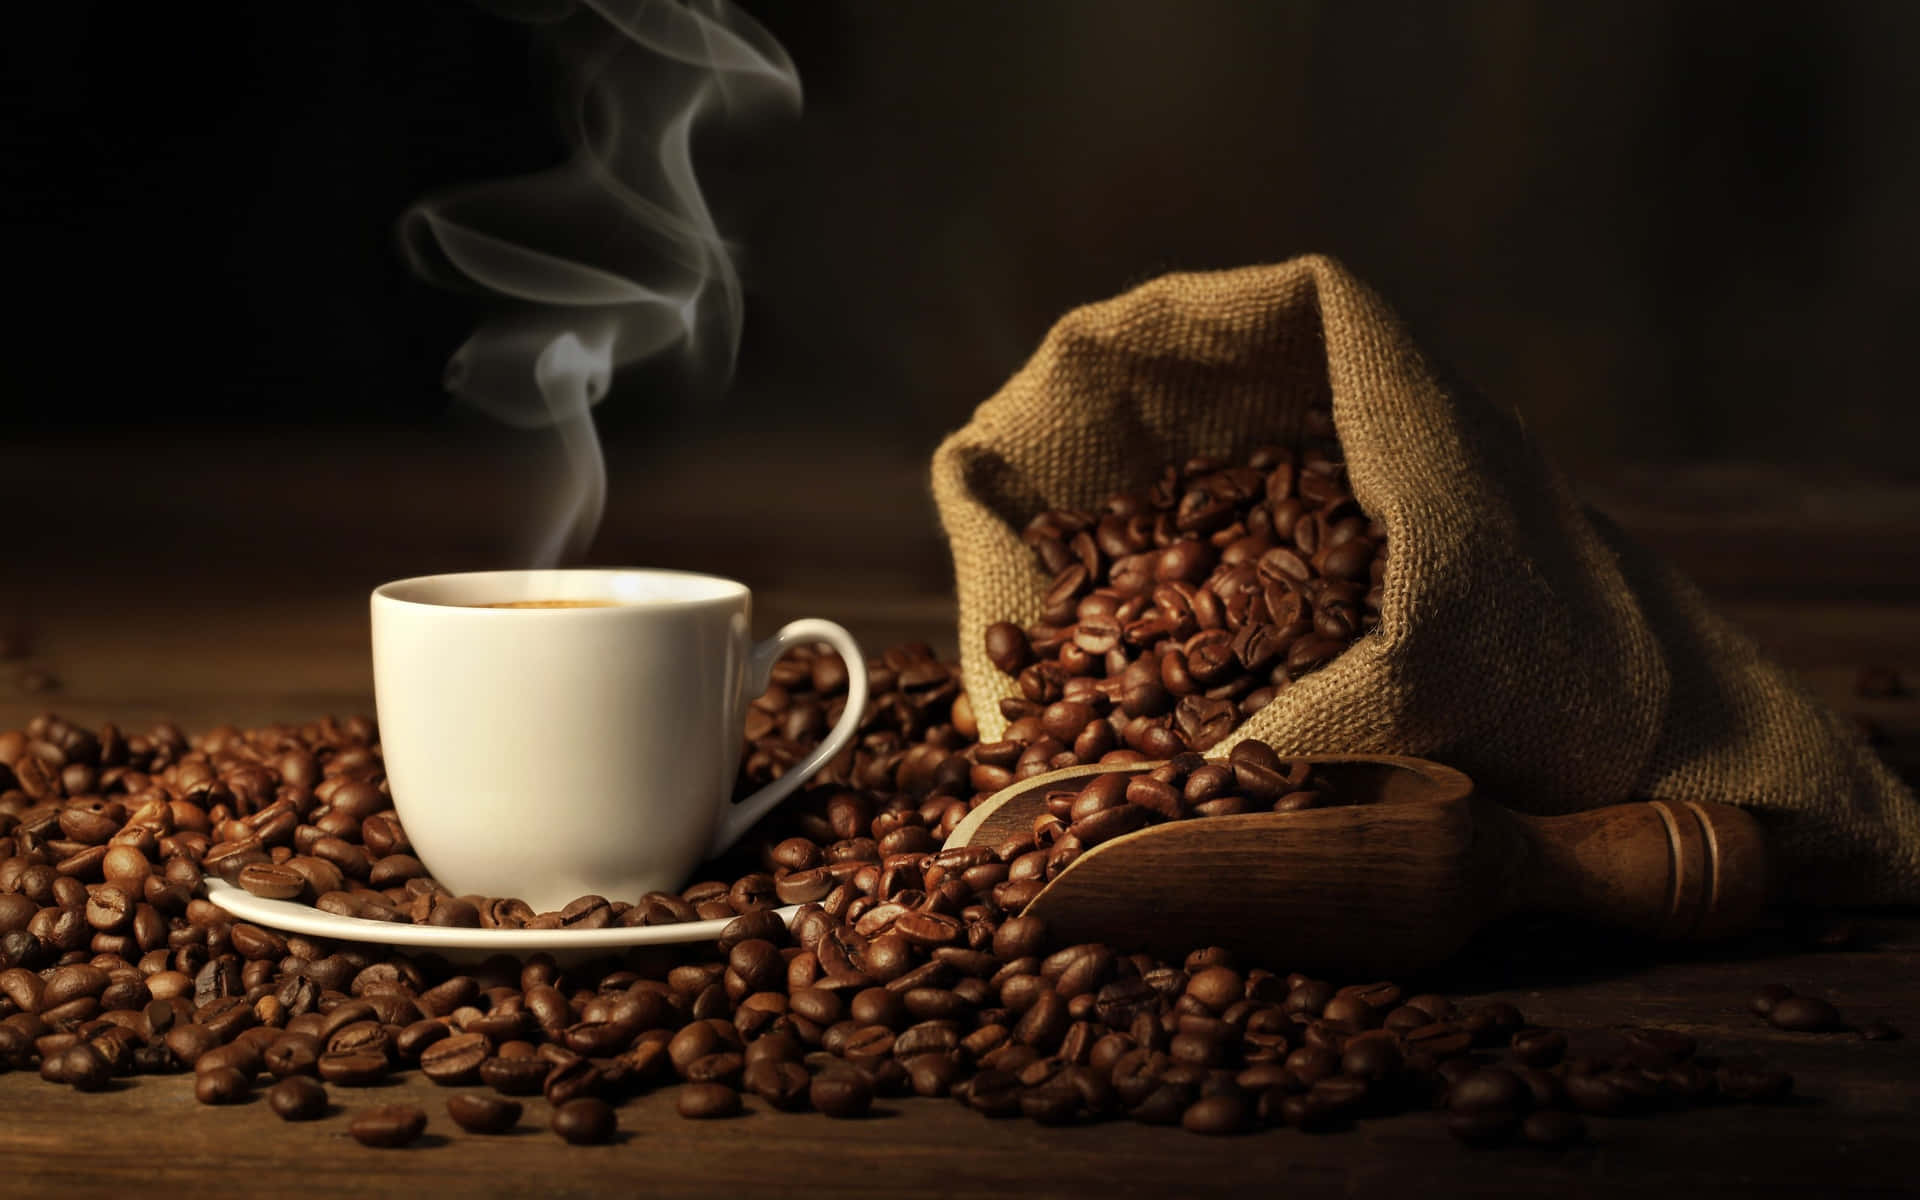 Free Coffee Wallpaper Downloads, [500+] Coffee Wallpapers for FREE |  